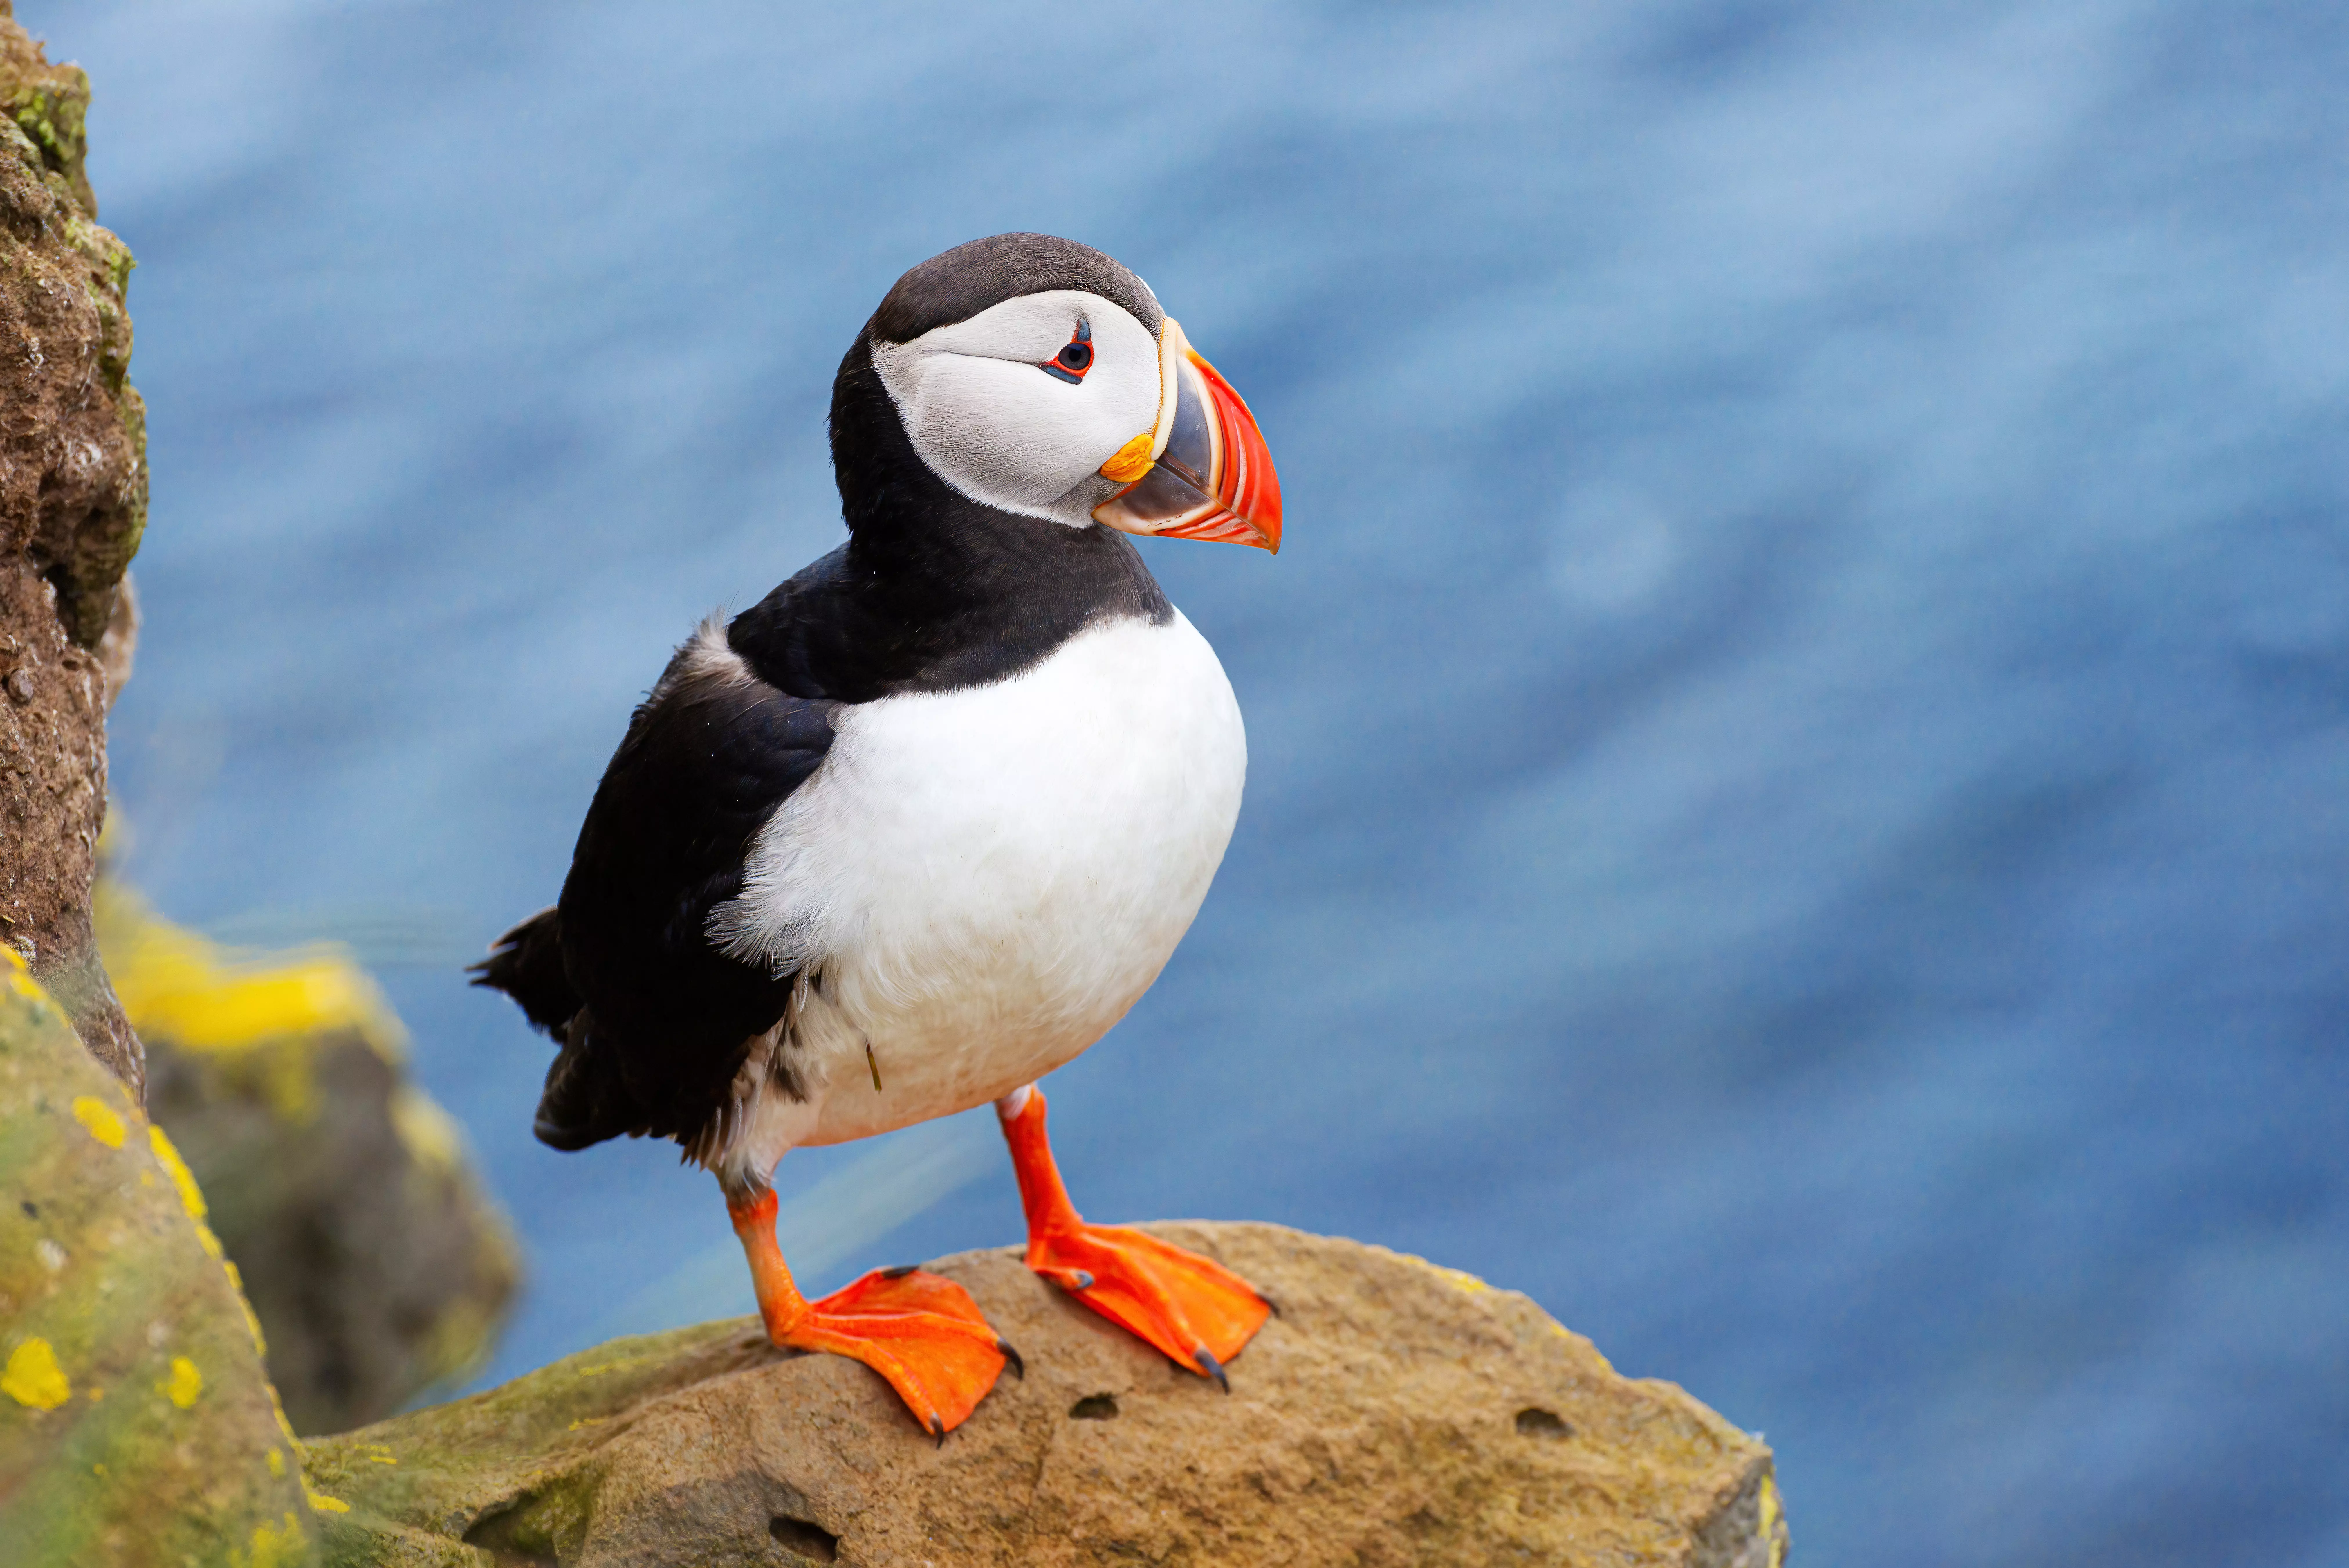 An Atlantic puffin in the Westfjords, Iceland, one of the best family holiday destinations